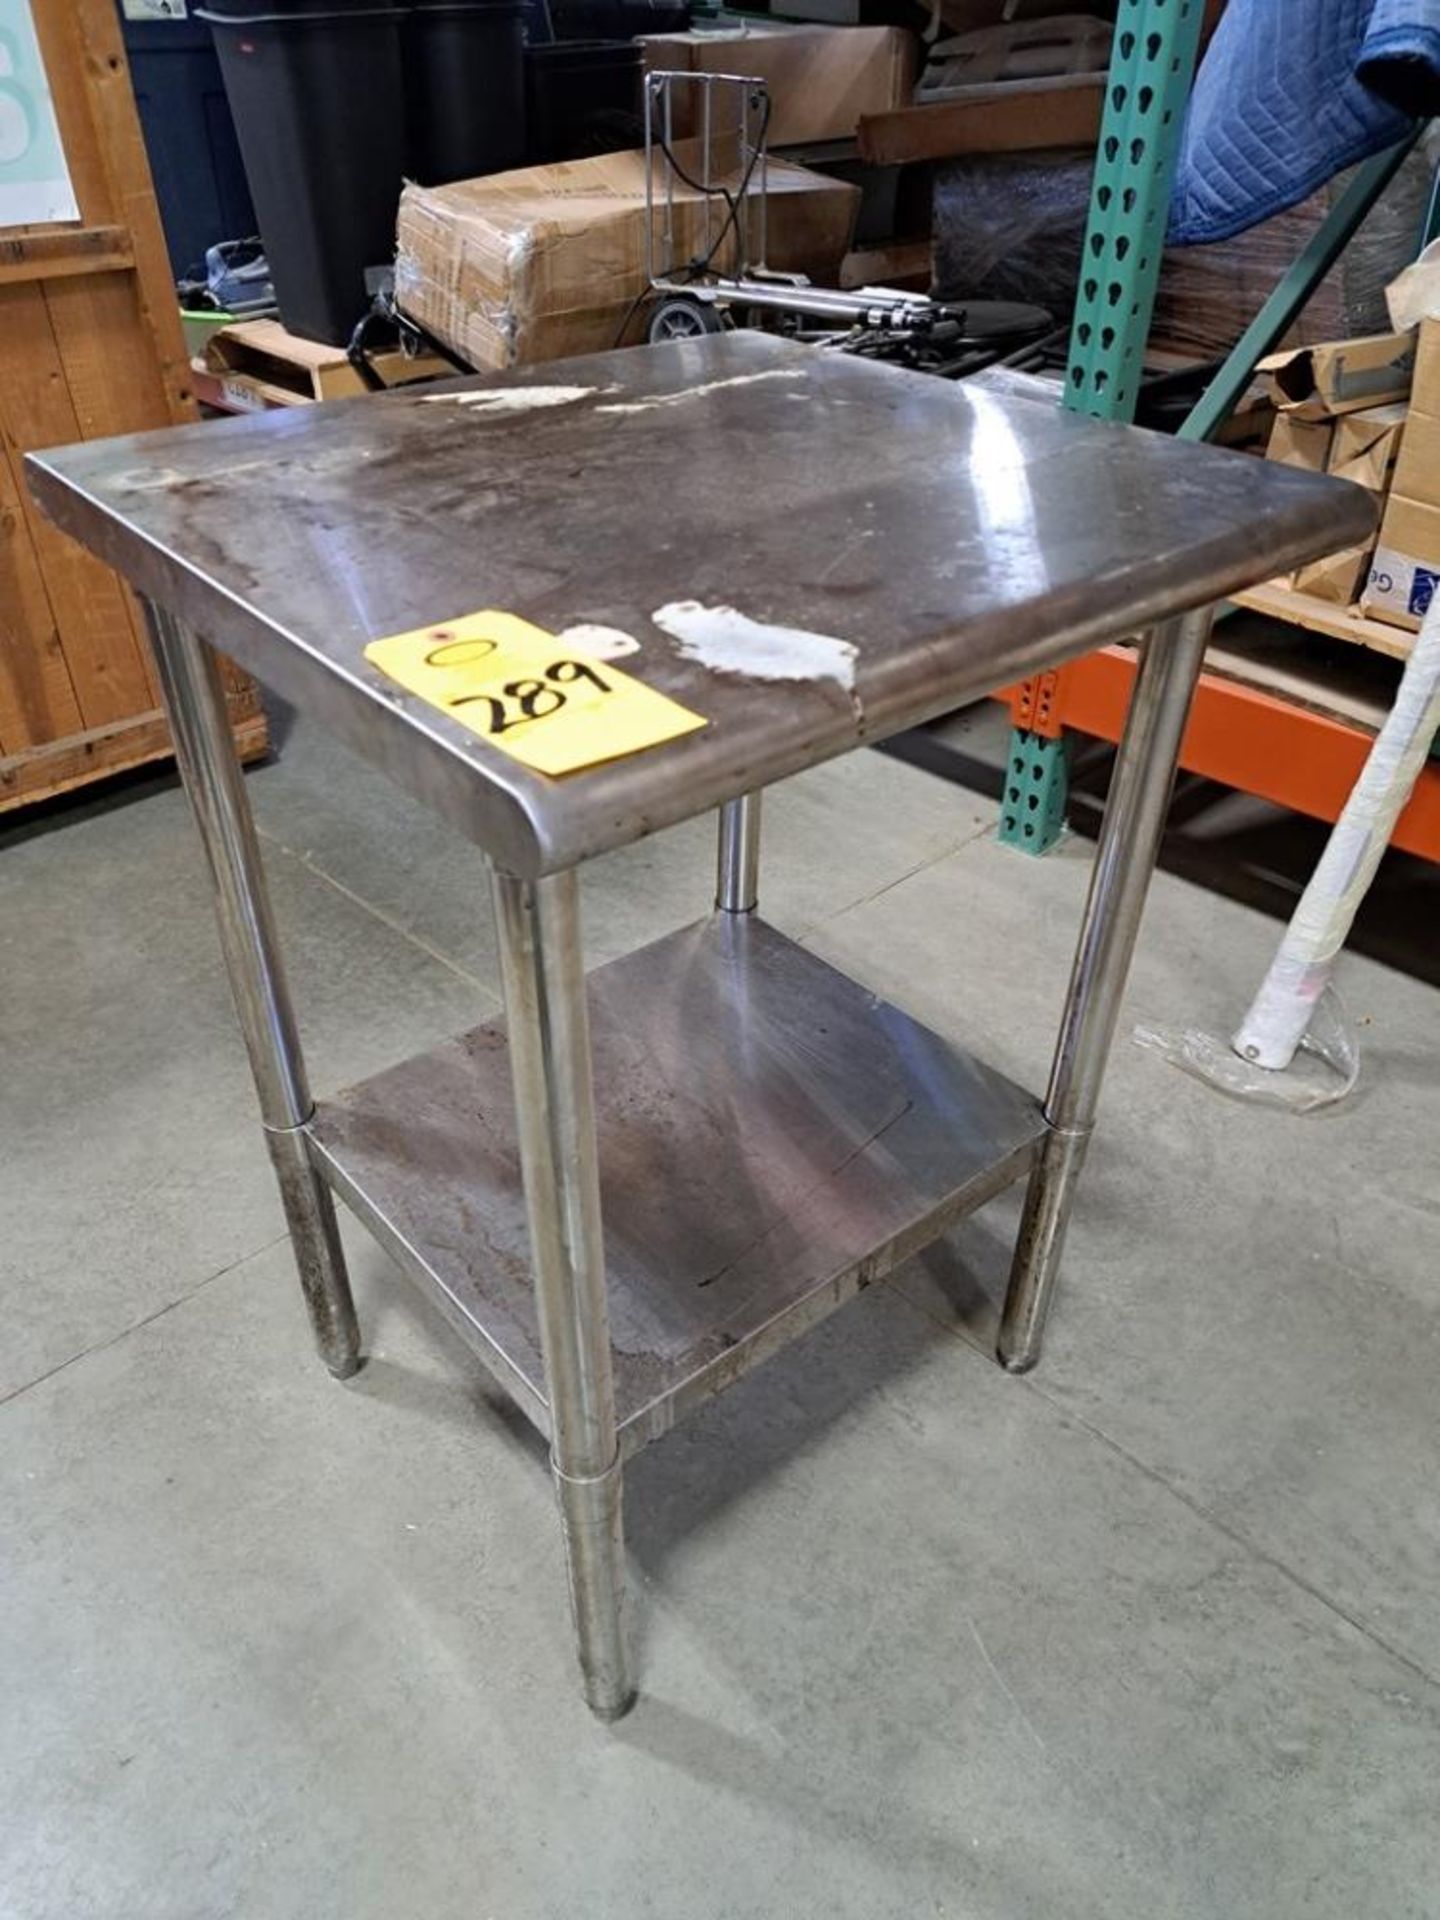 Stainless Steel Table, 24" X 24" X 35" (Required Loading Fee: $15.00) NO HAND CARRY (Price Is For